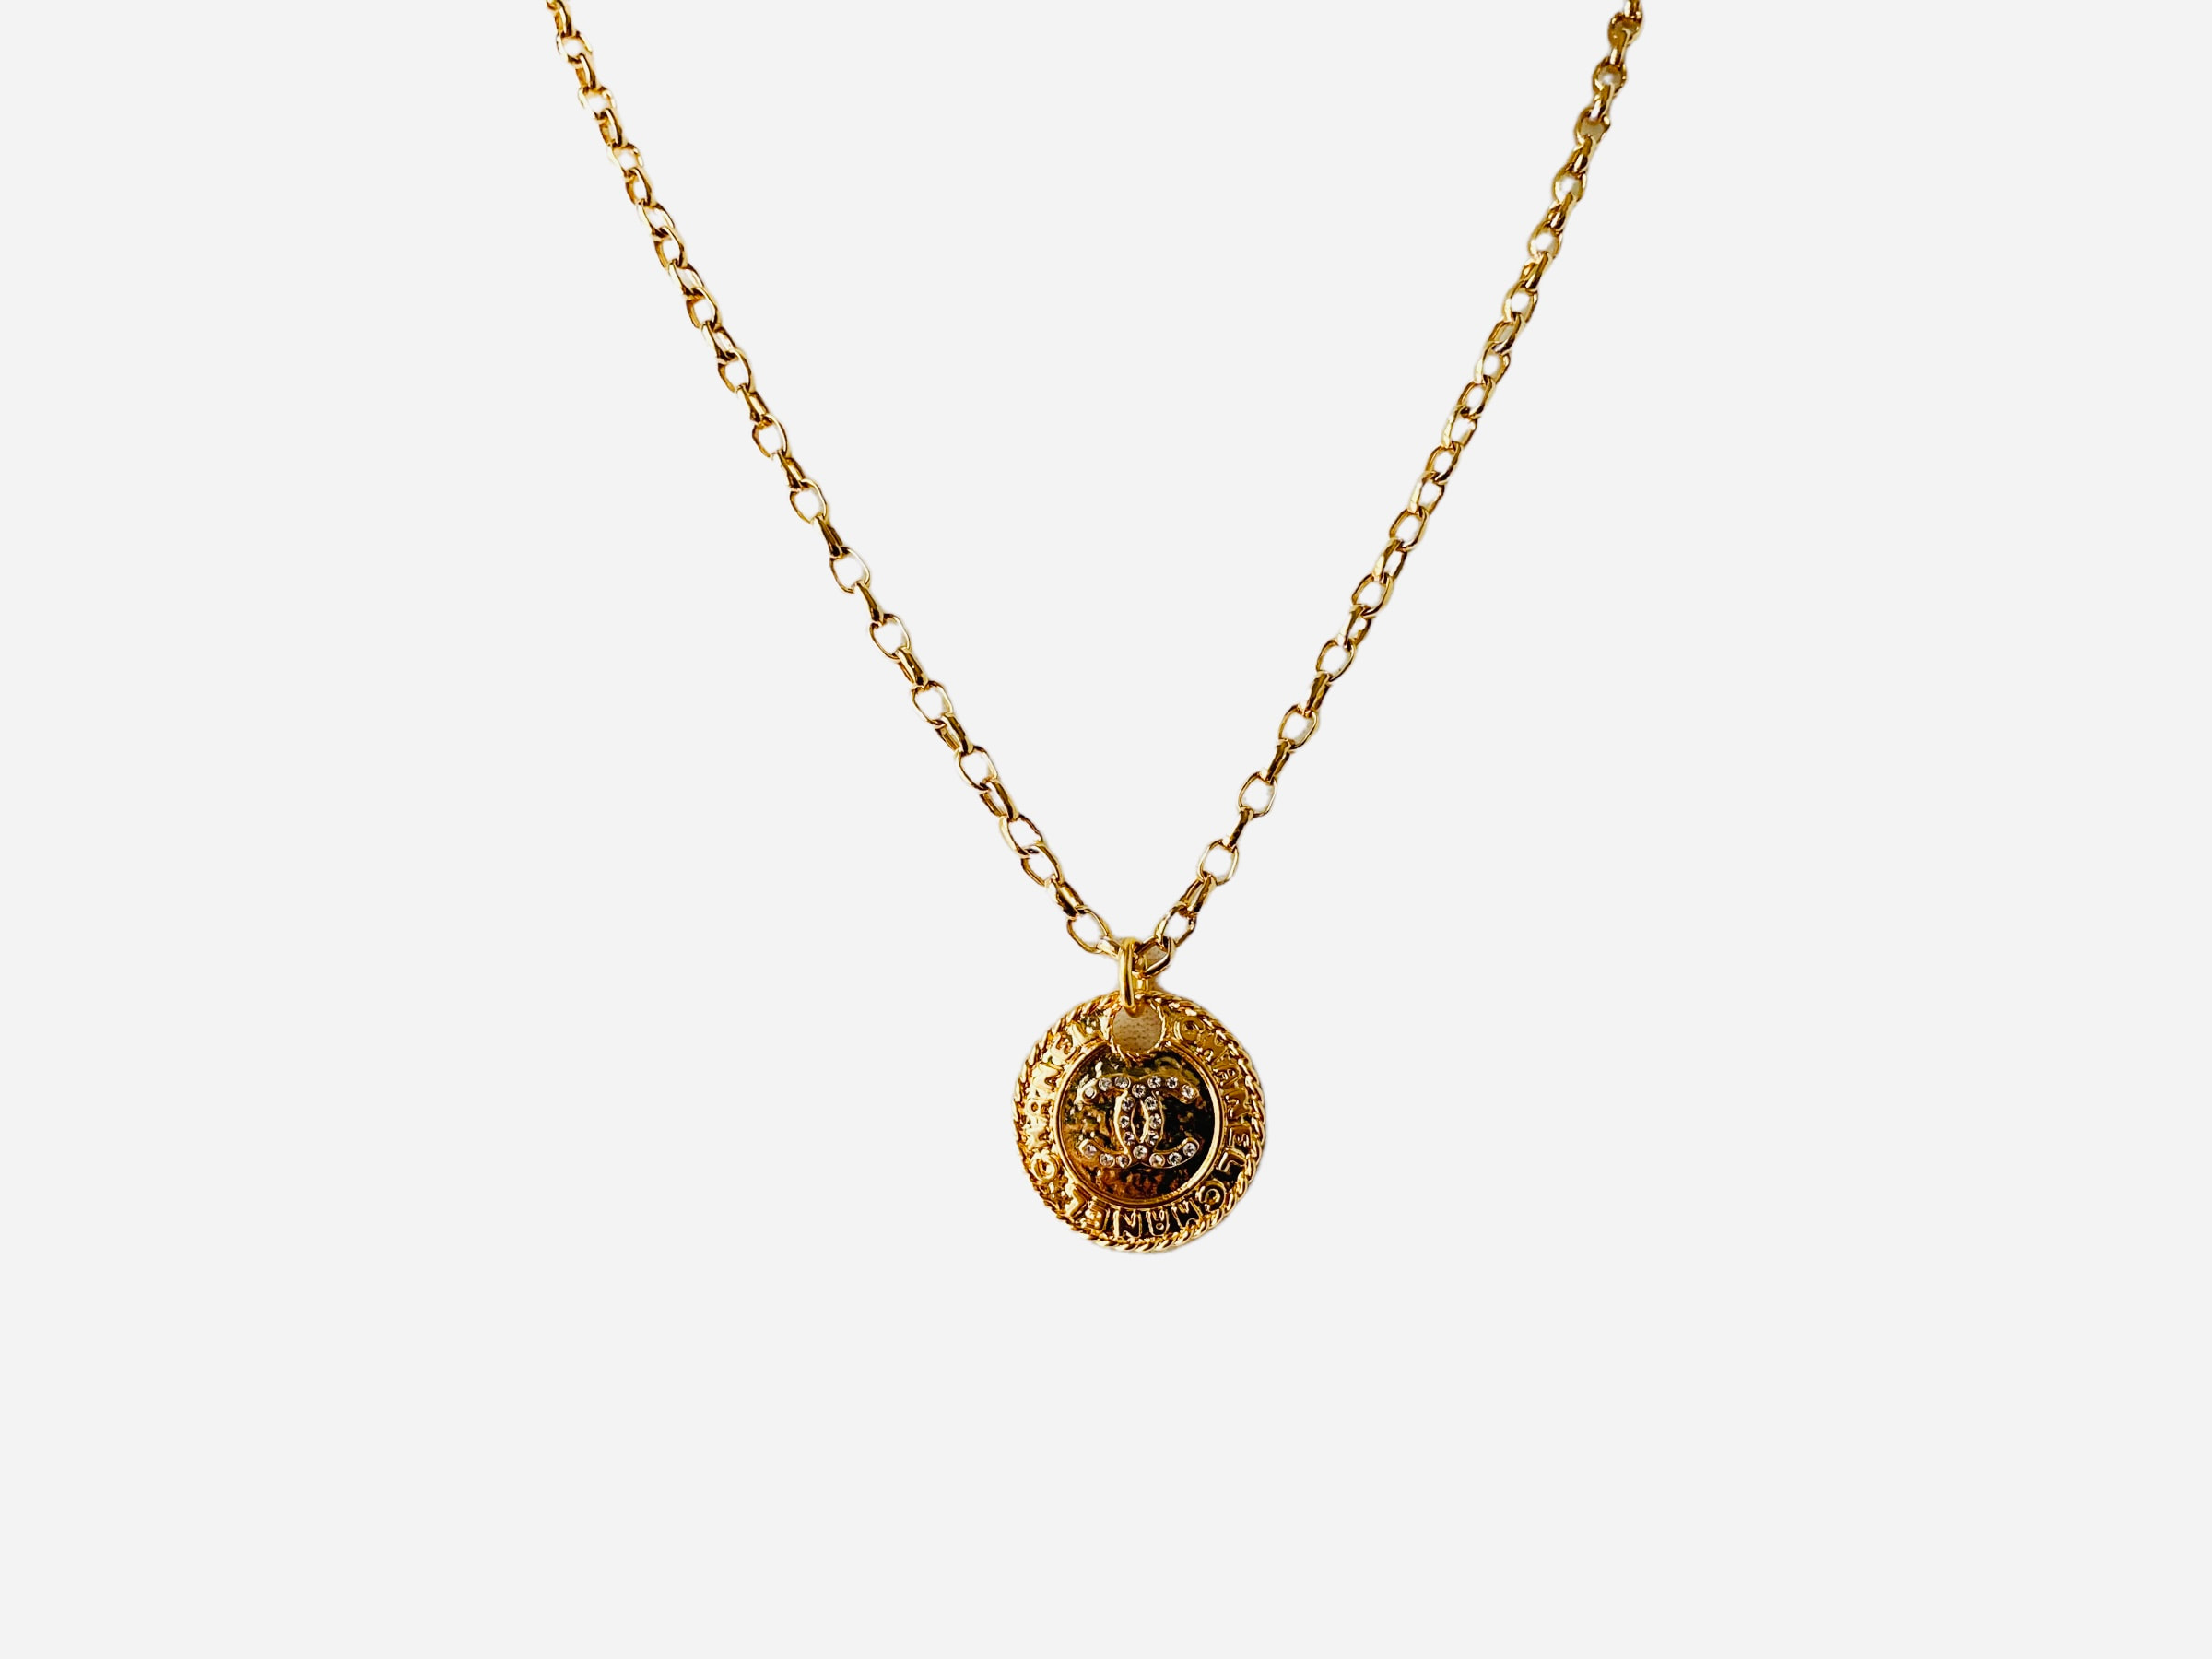 Repurposed Chanel Crystal & Gold Charm Necklace